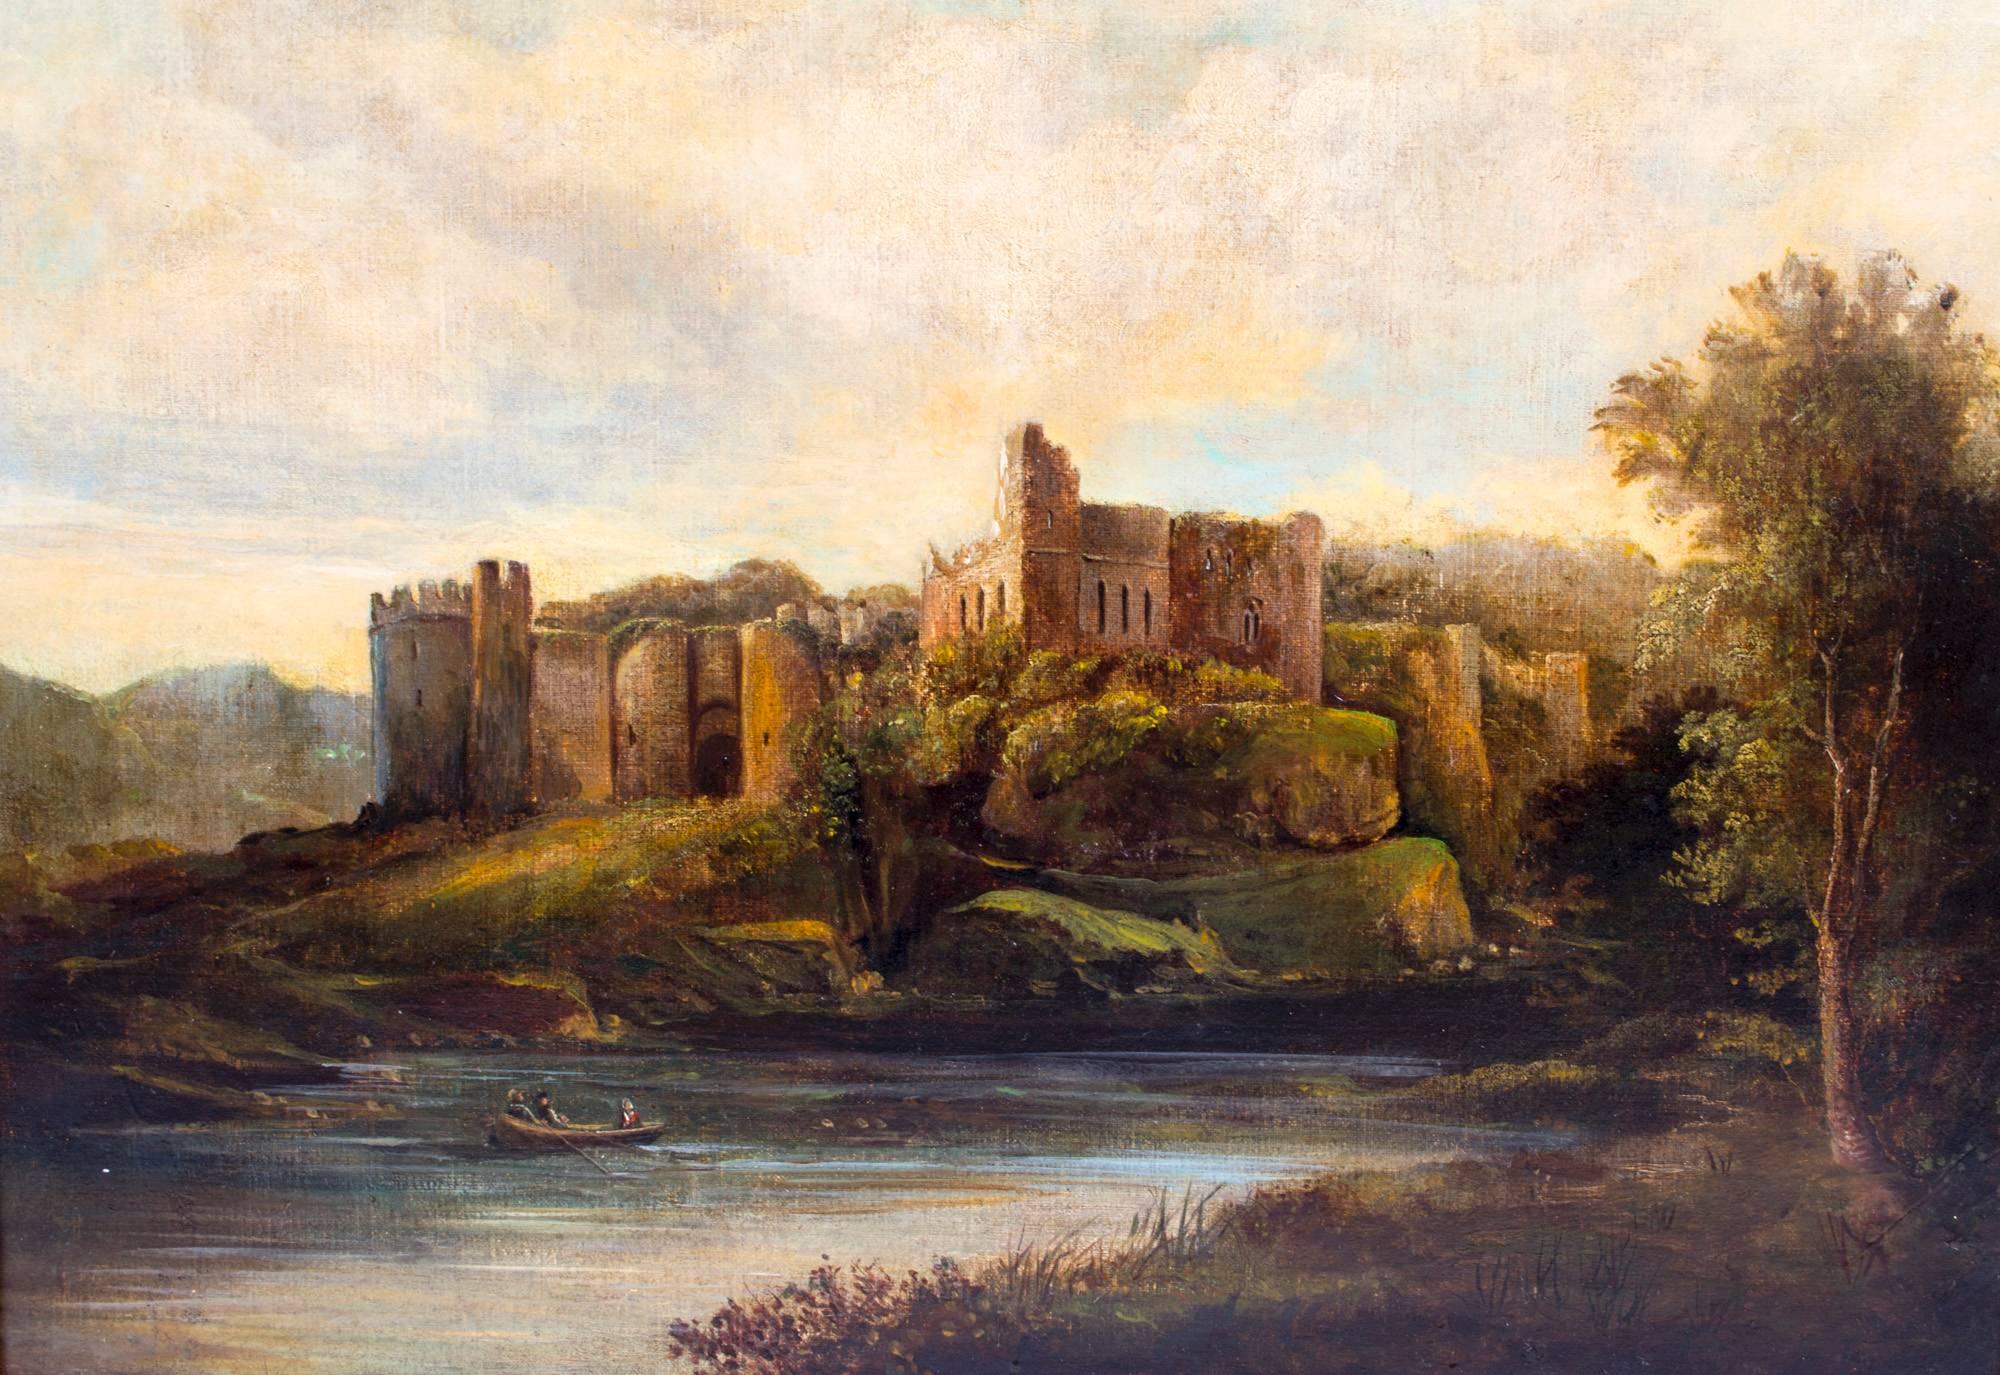 This is a beautiful antique oil painting which depicts the ruins of Chepstow Castle in Monmouthshire which is situated on a cliff above the River Wye.

It is attributed to the 19th century English School.

It is a delightful and tranquil picture